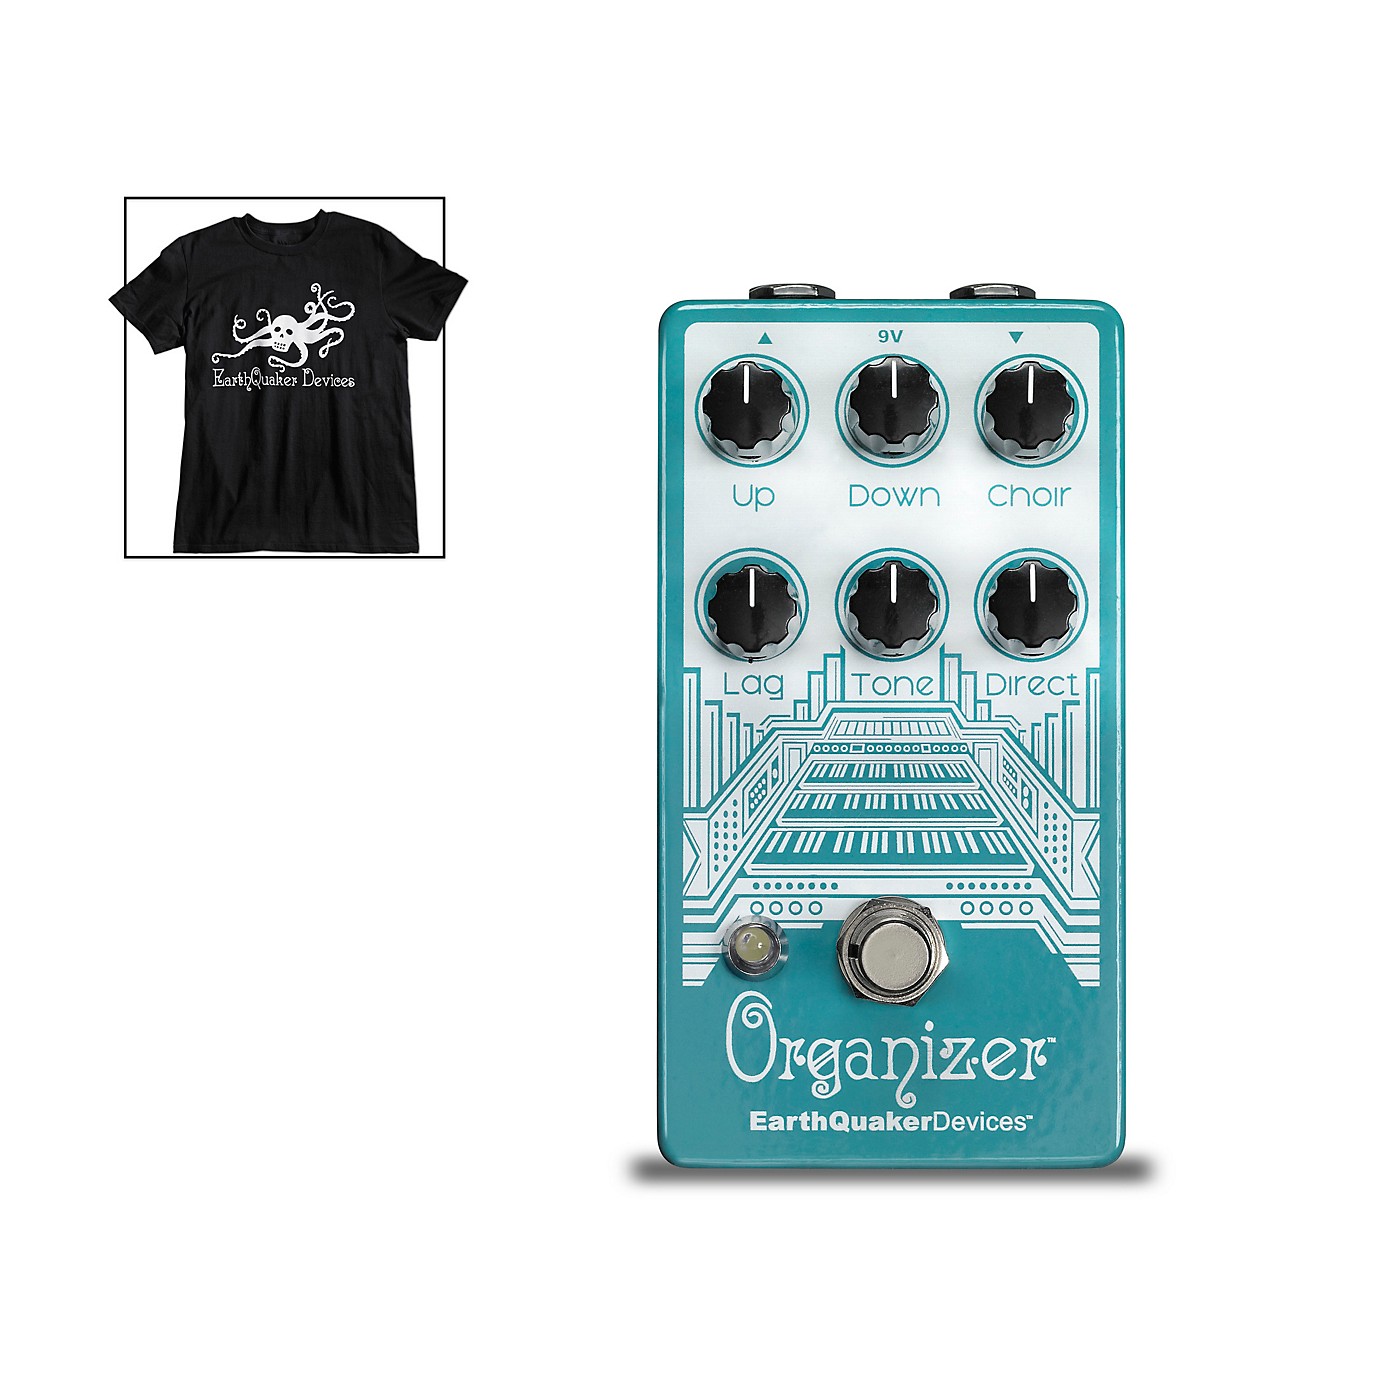 EarthQuaker Devices Organizer V2 Organ Emulator Effects Pedal and Octoskull T-Shirt Large Black thumbnail